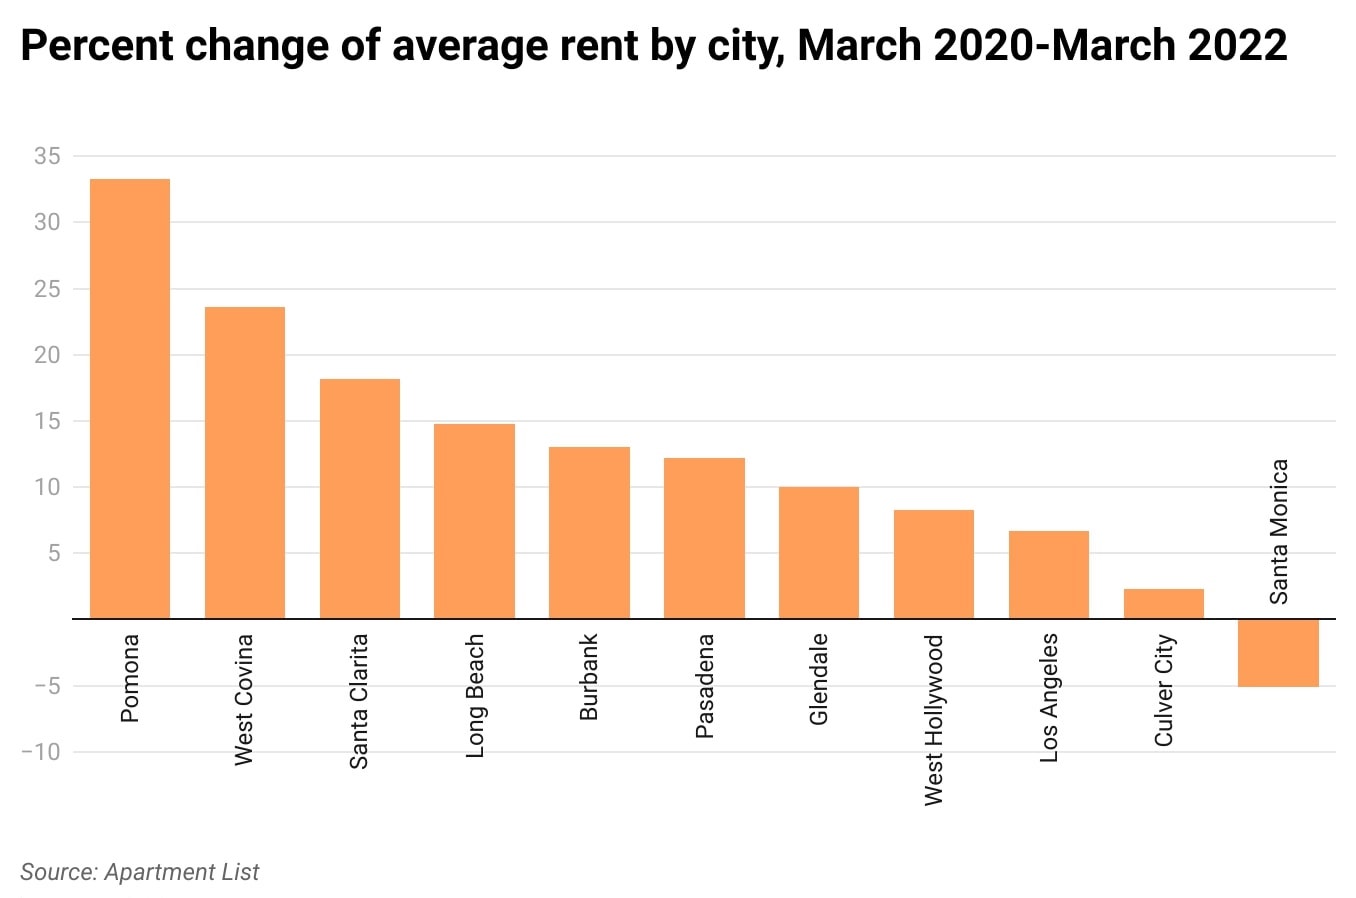 Rent increases for 11 cities in Los Angeles County